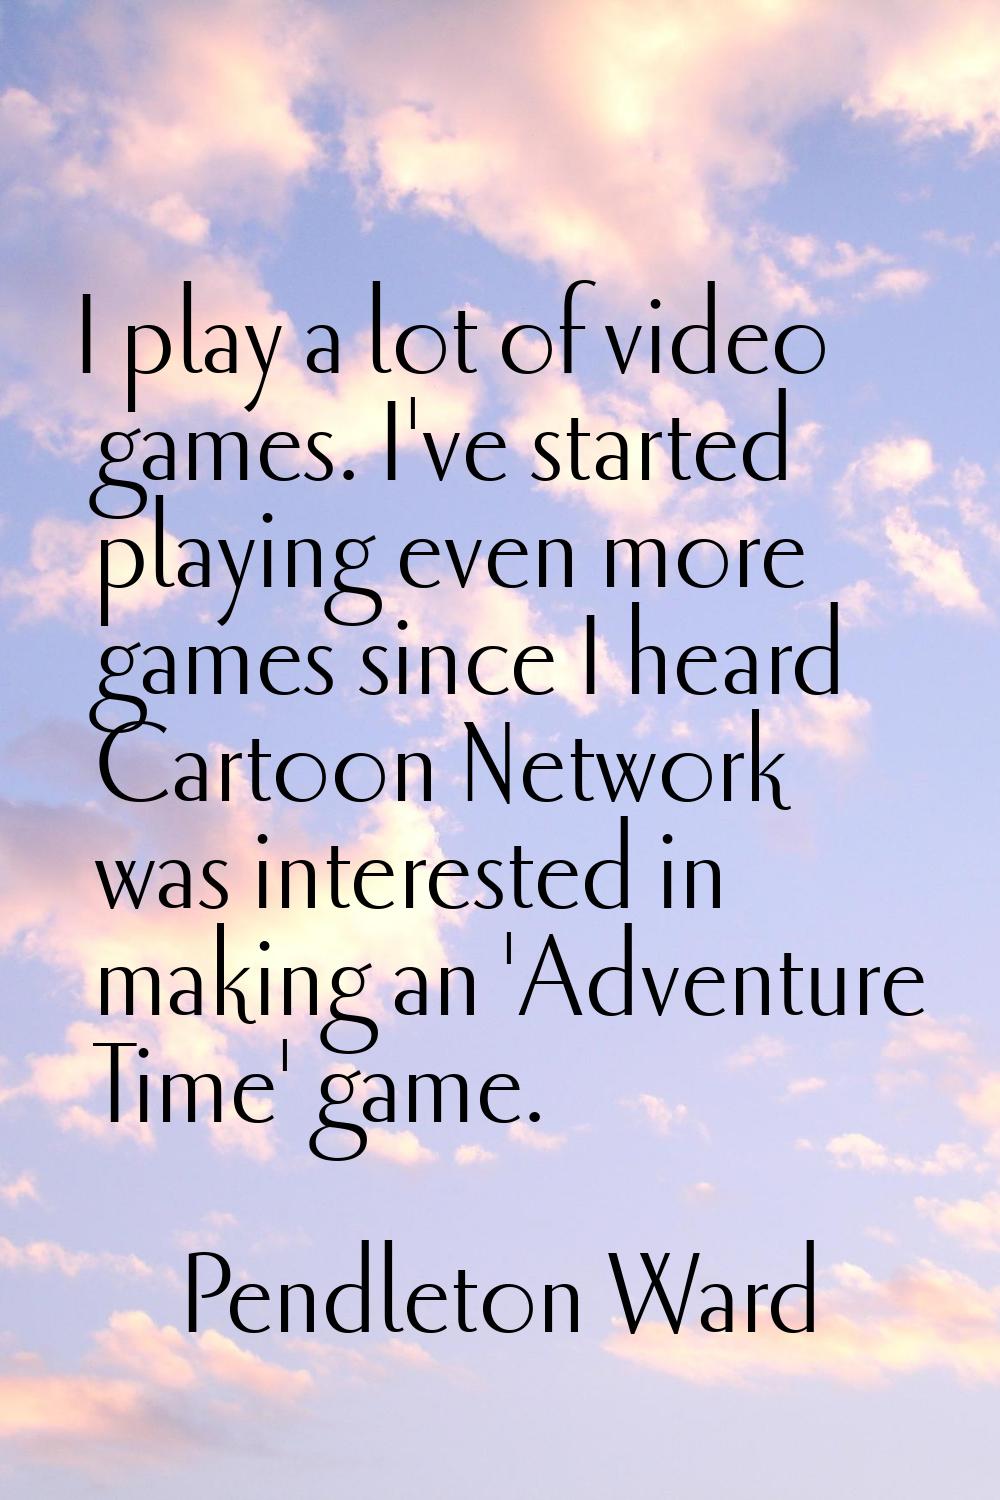 I play a lot of video games. I've started playing even more games since I heard Cartoon Network was